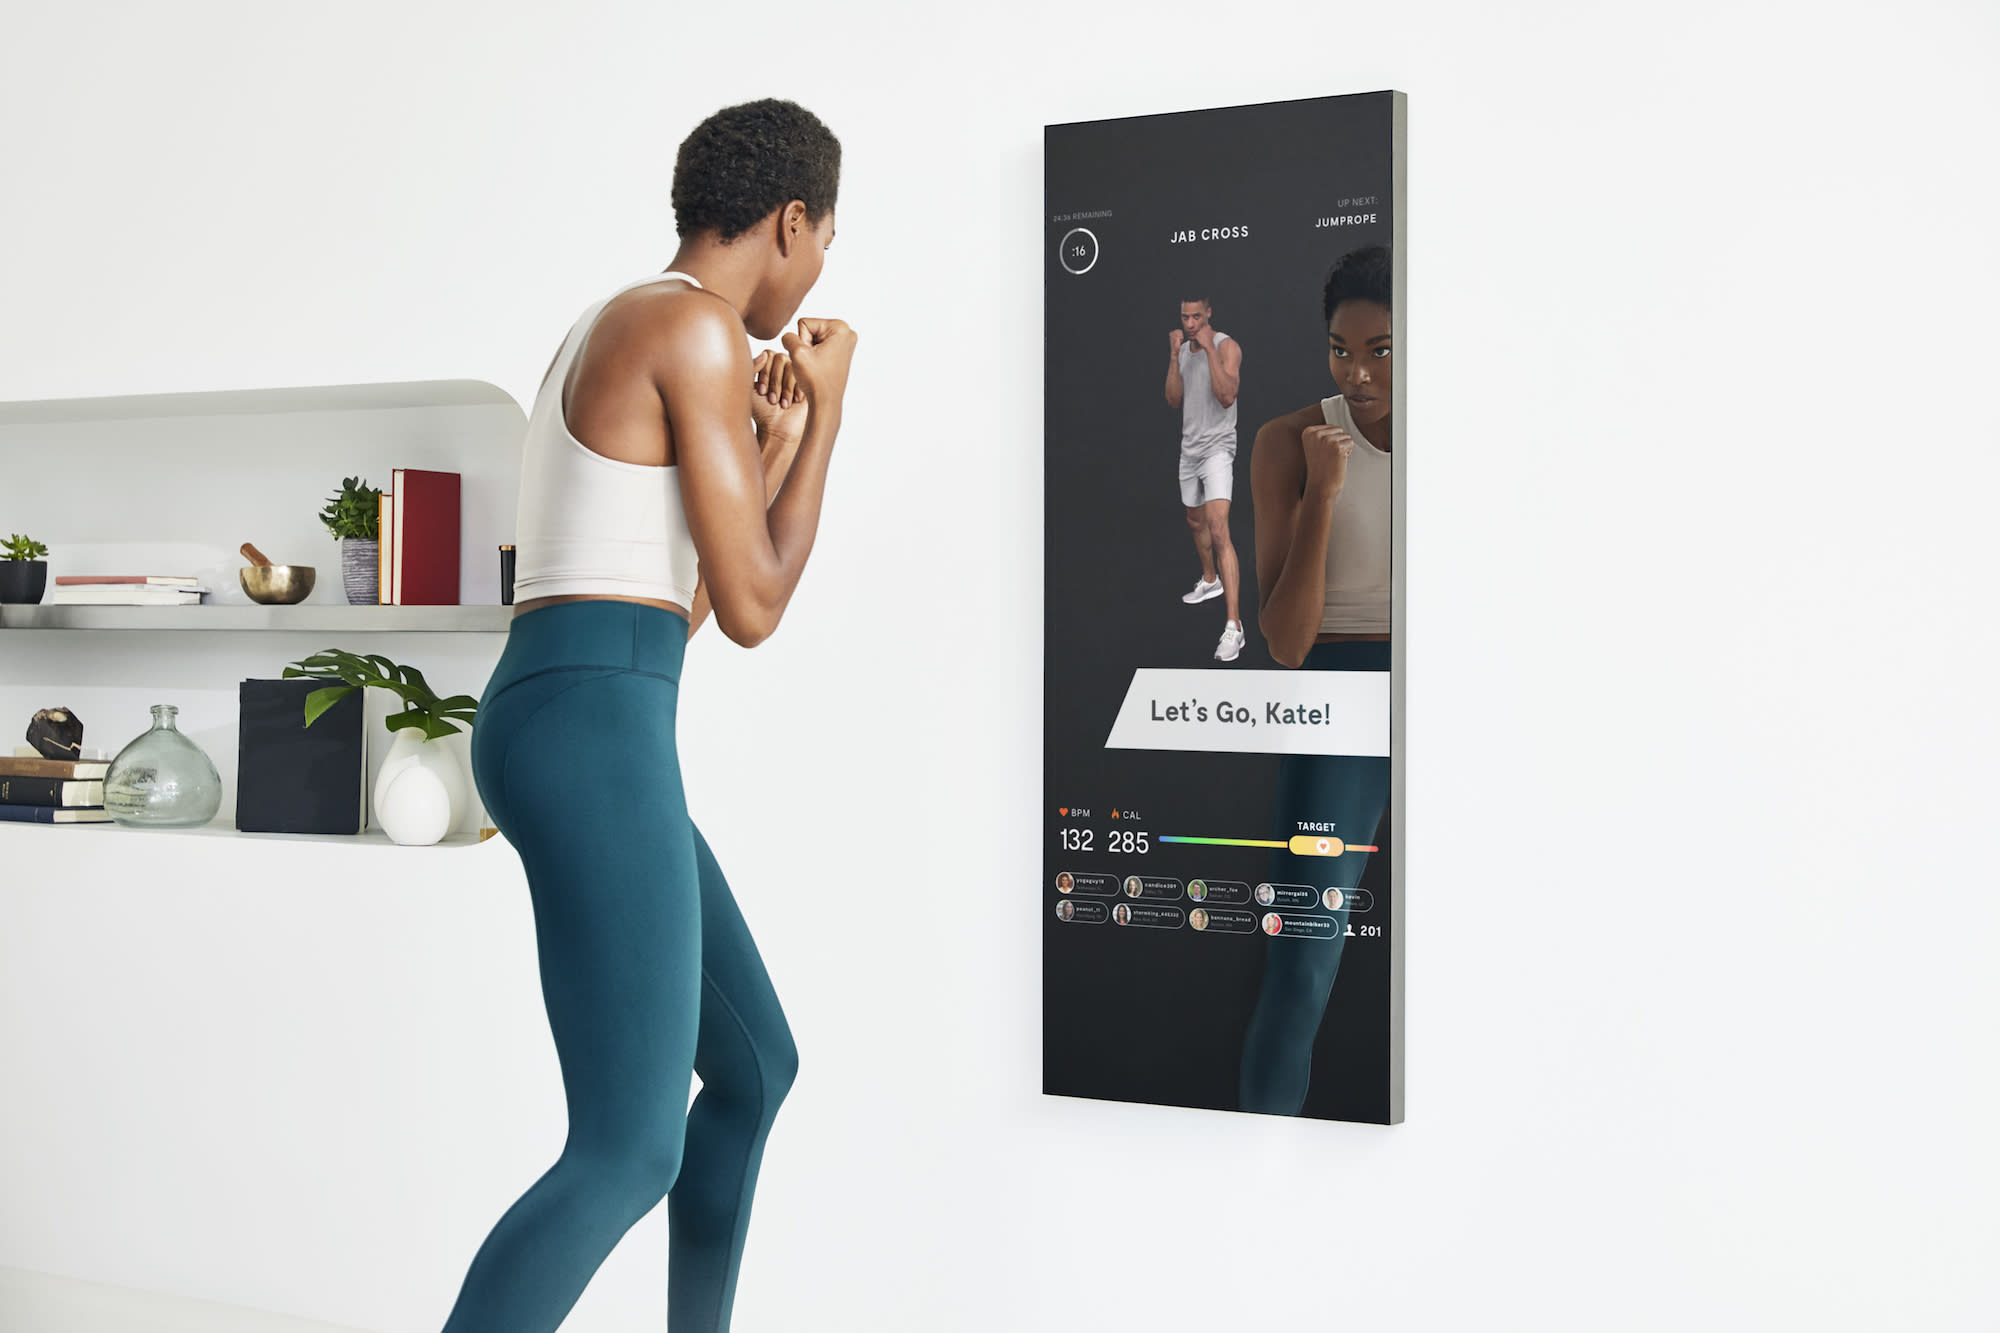 A $1,500 smart mirror brings live fitness classes to your home ...